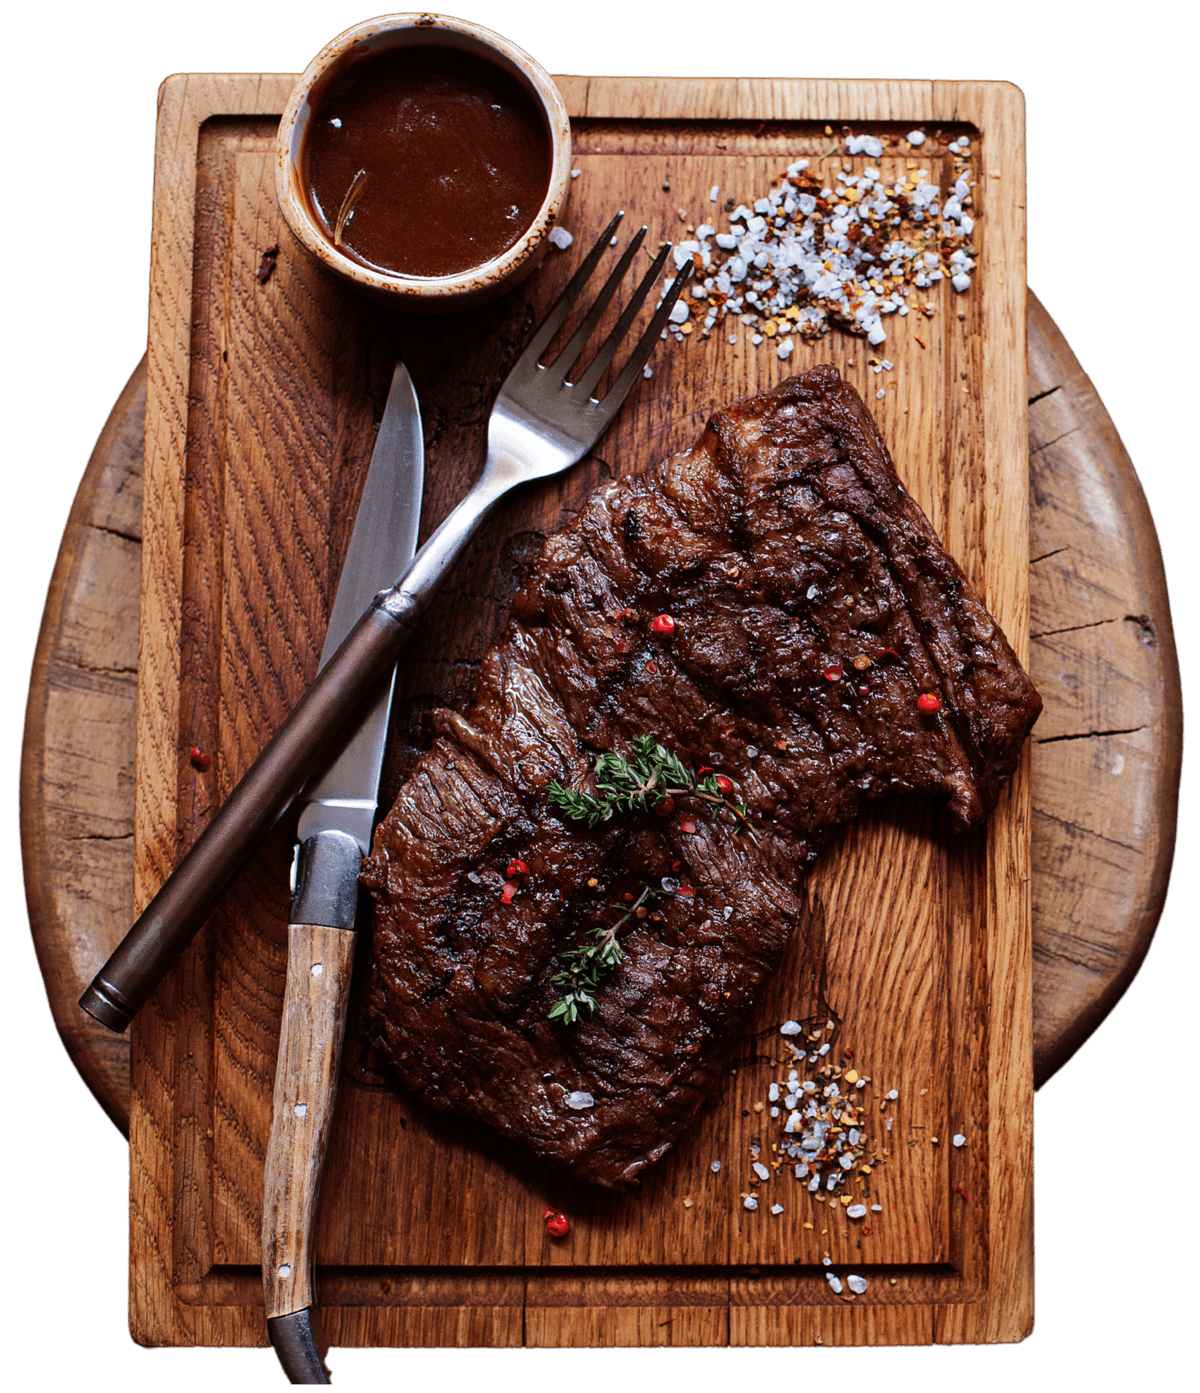 Grilled steak on wooden board with sauce and spices.